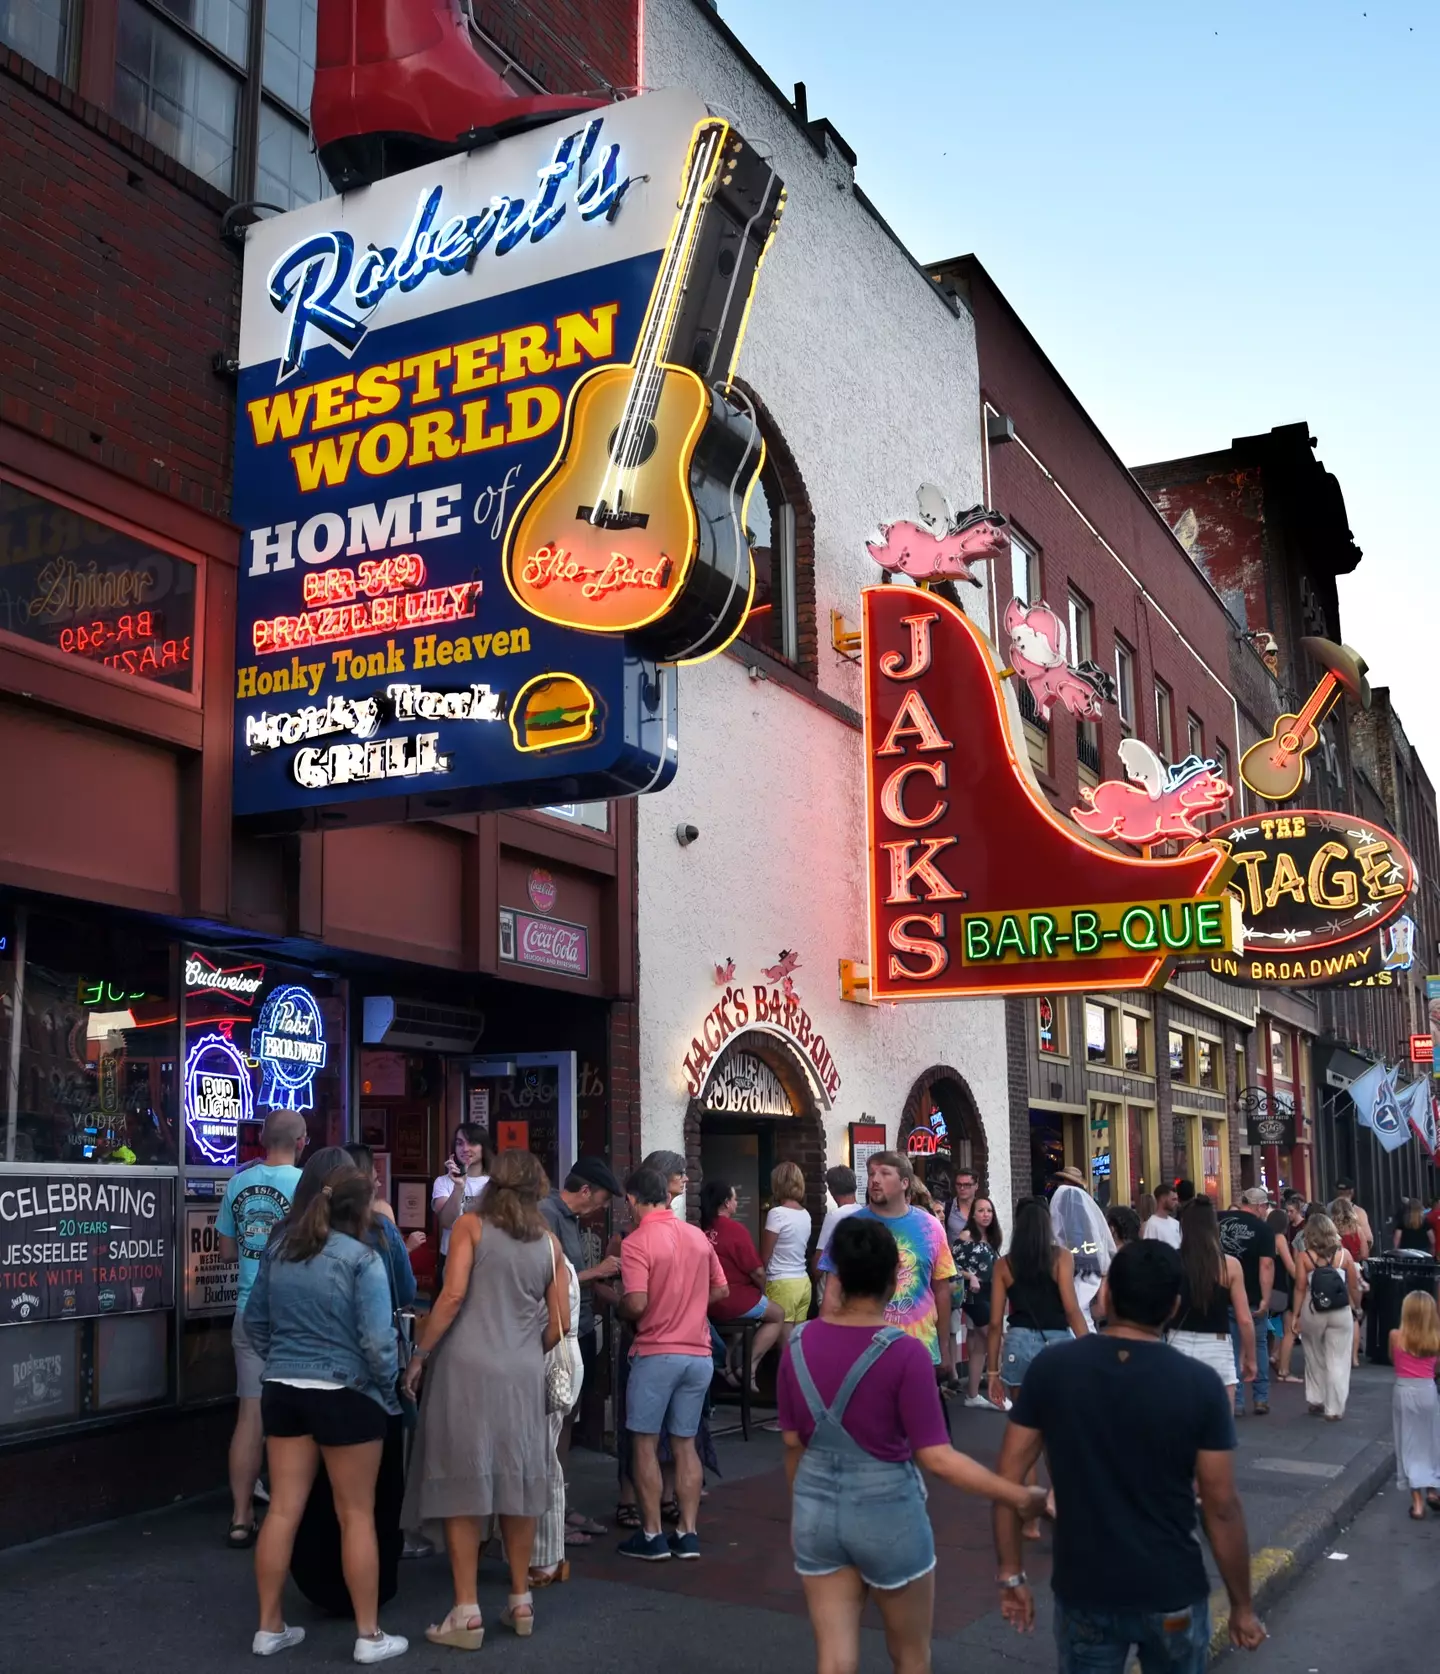 Nashville is the worst US city to live in your 20s according to the TikToker.